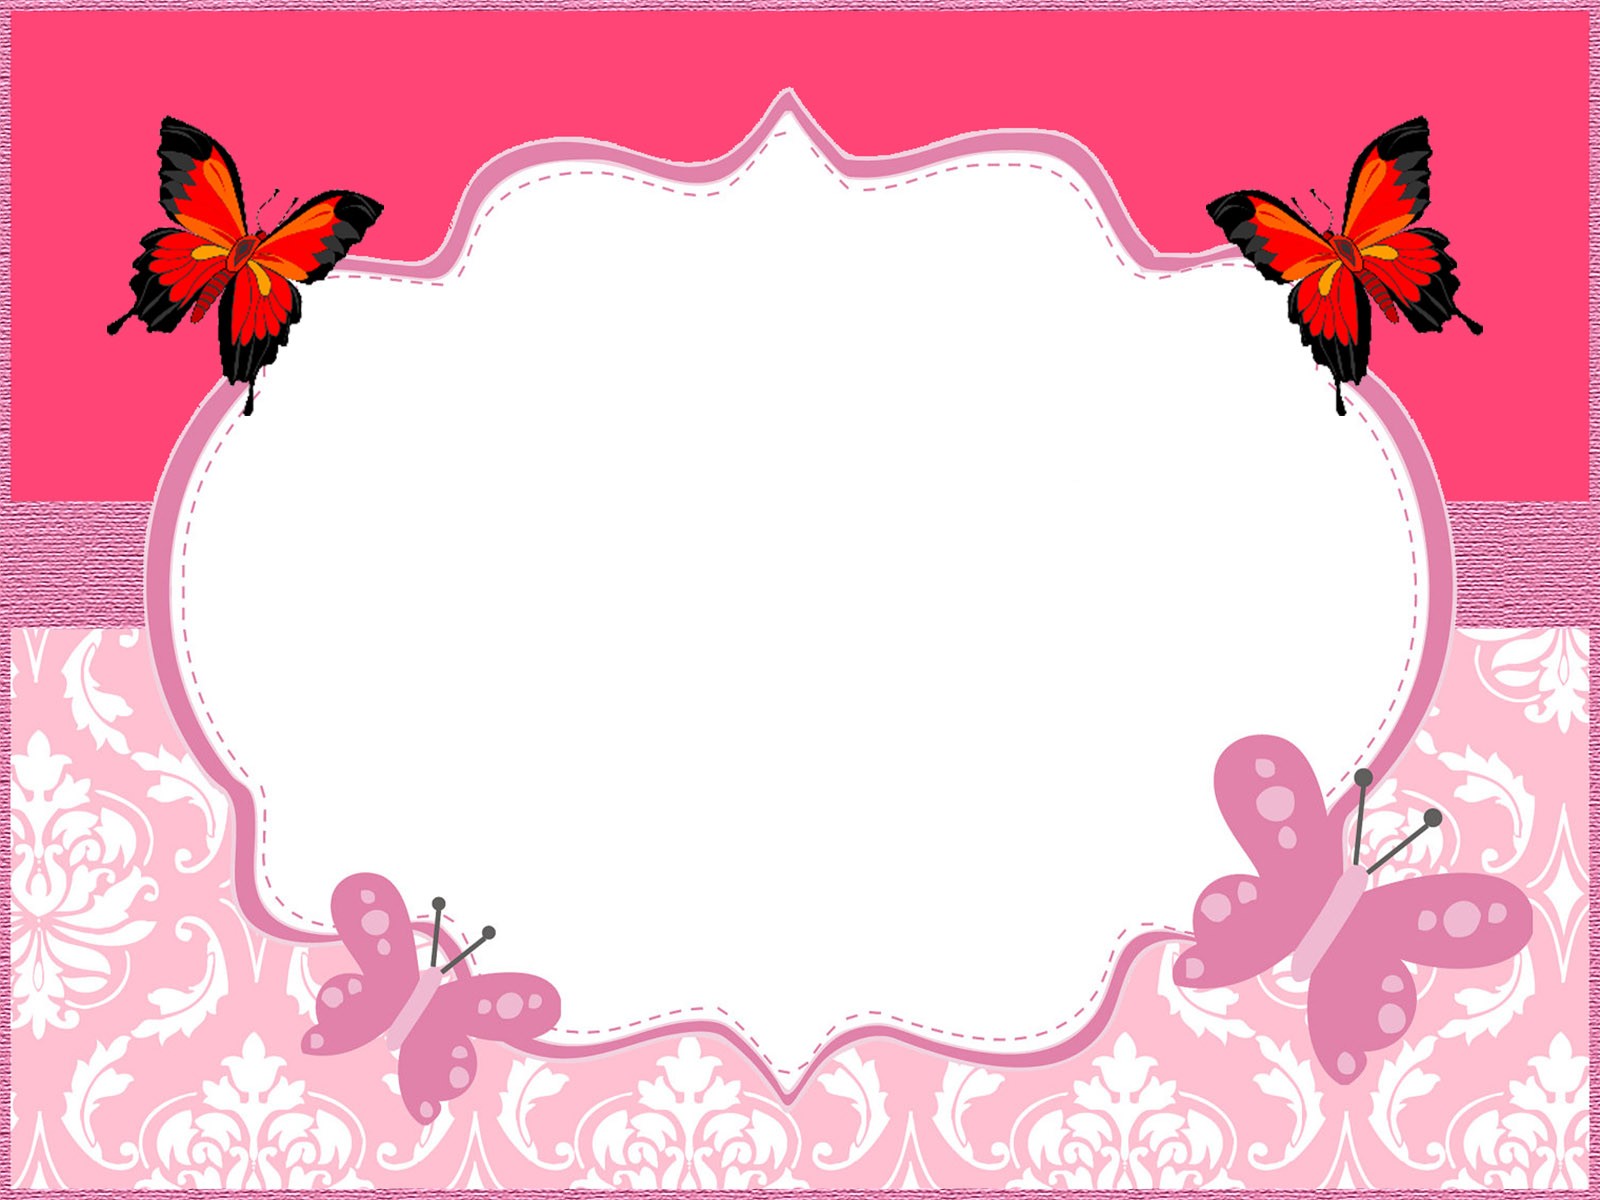 butterfly-party-invitation-ideas-and-free-invitation-templates-invitations-online